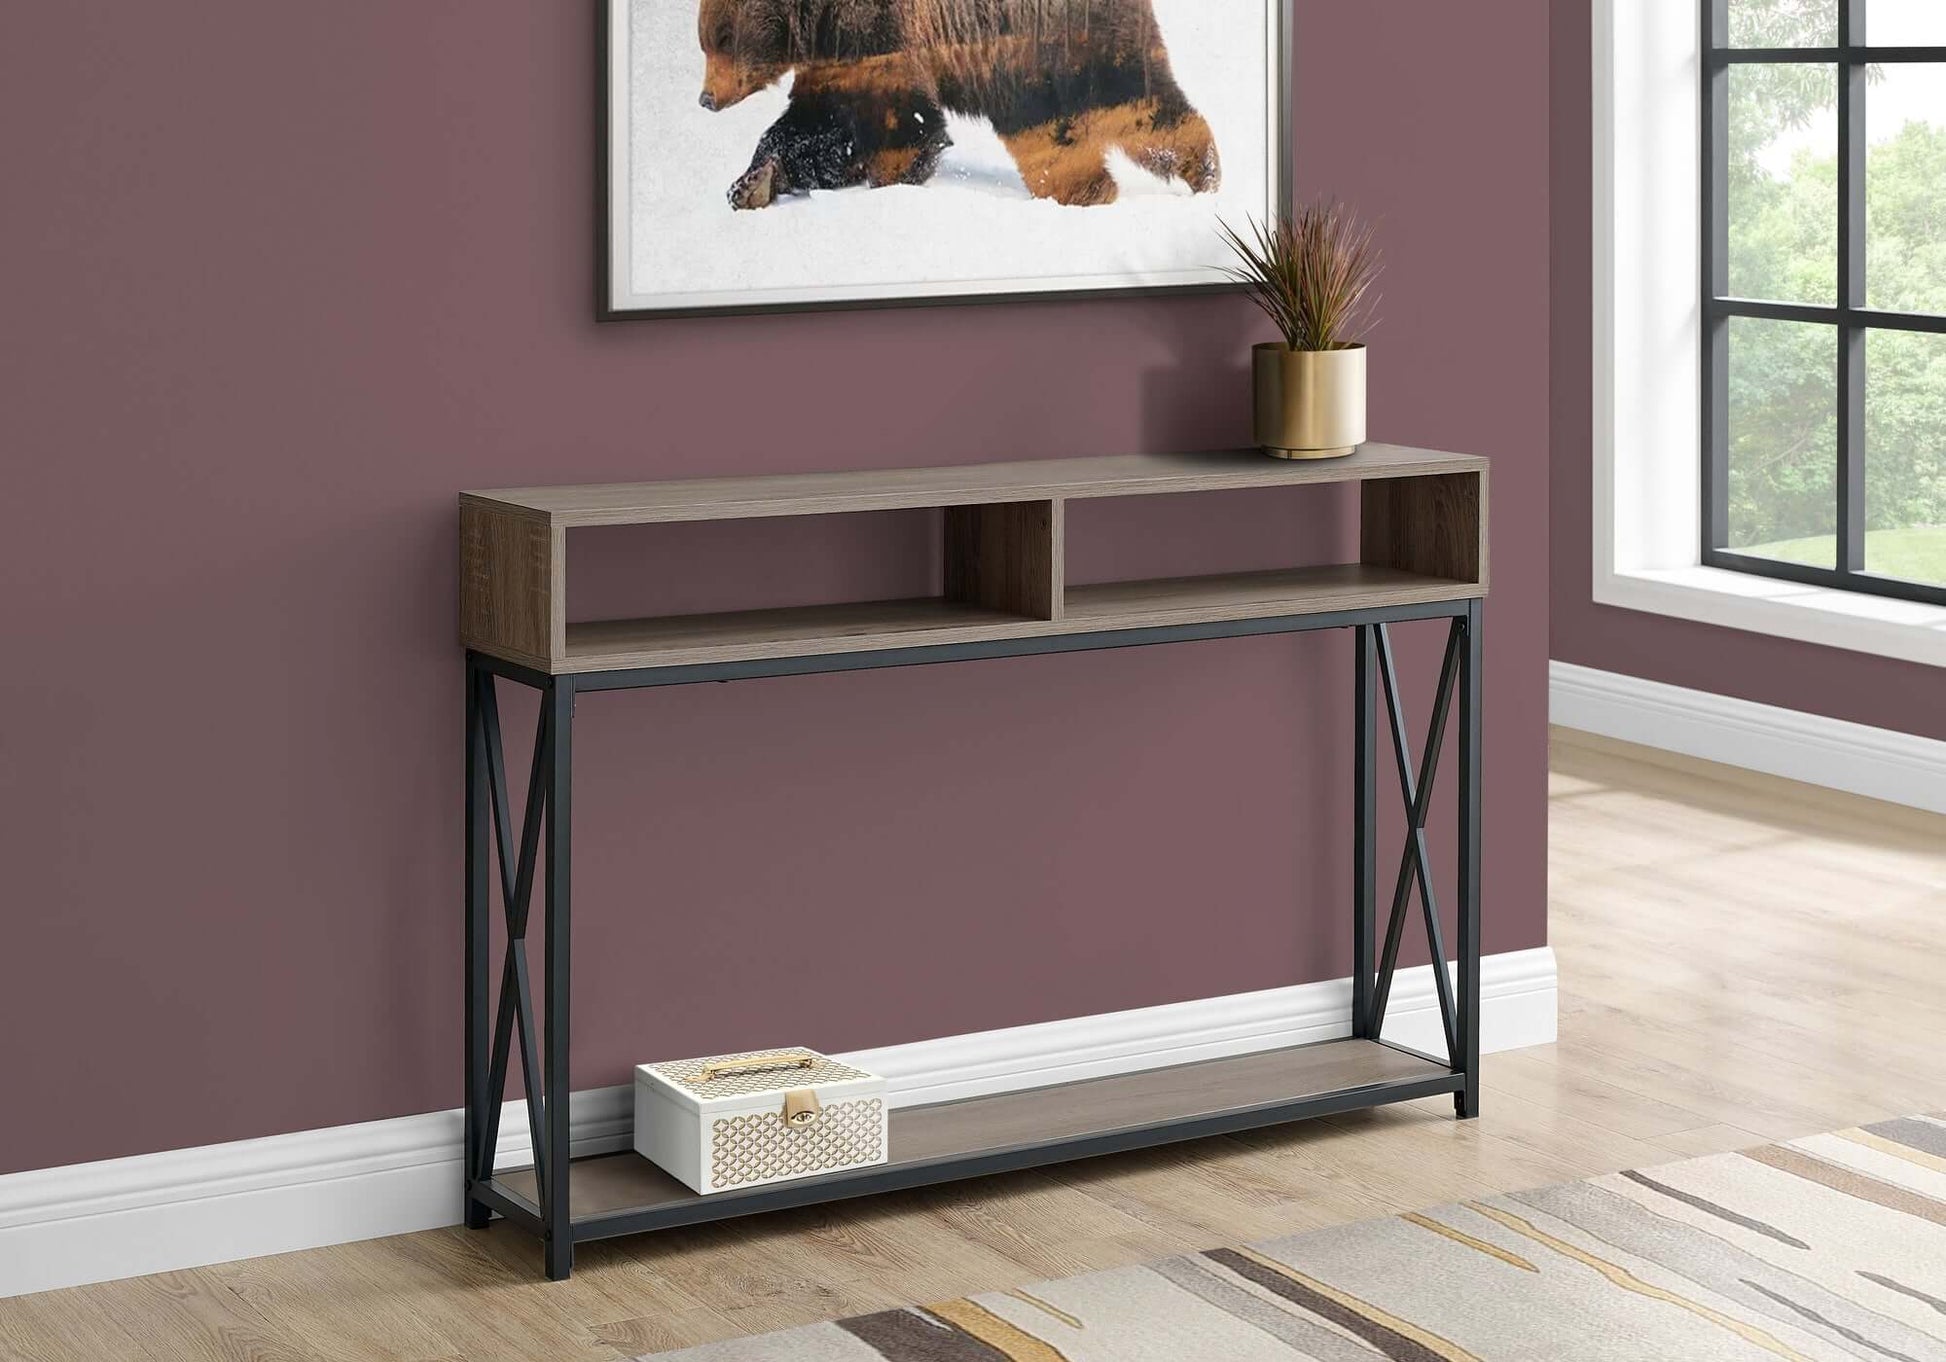 Monarch Specialties - Contemporary 48L Wood Hall Console in Taupe Finish - I 3573